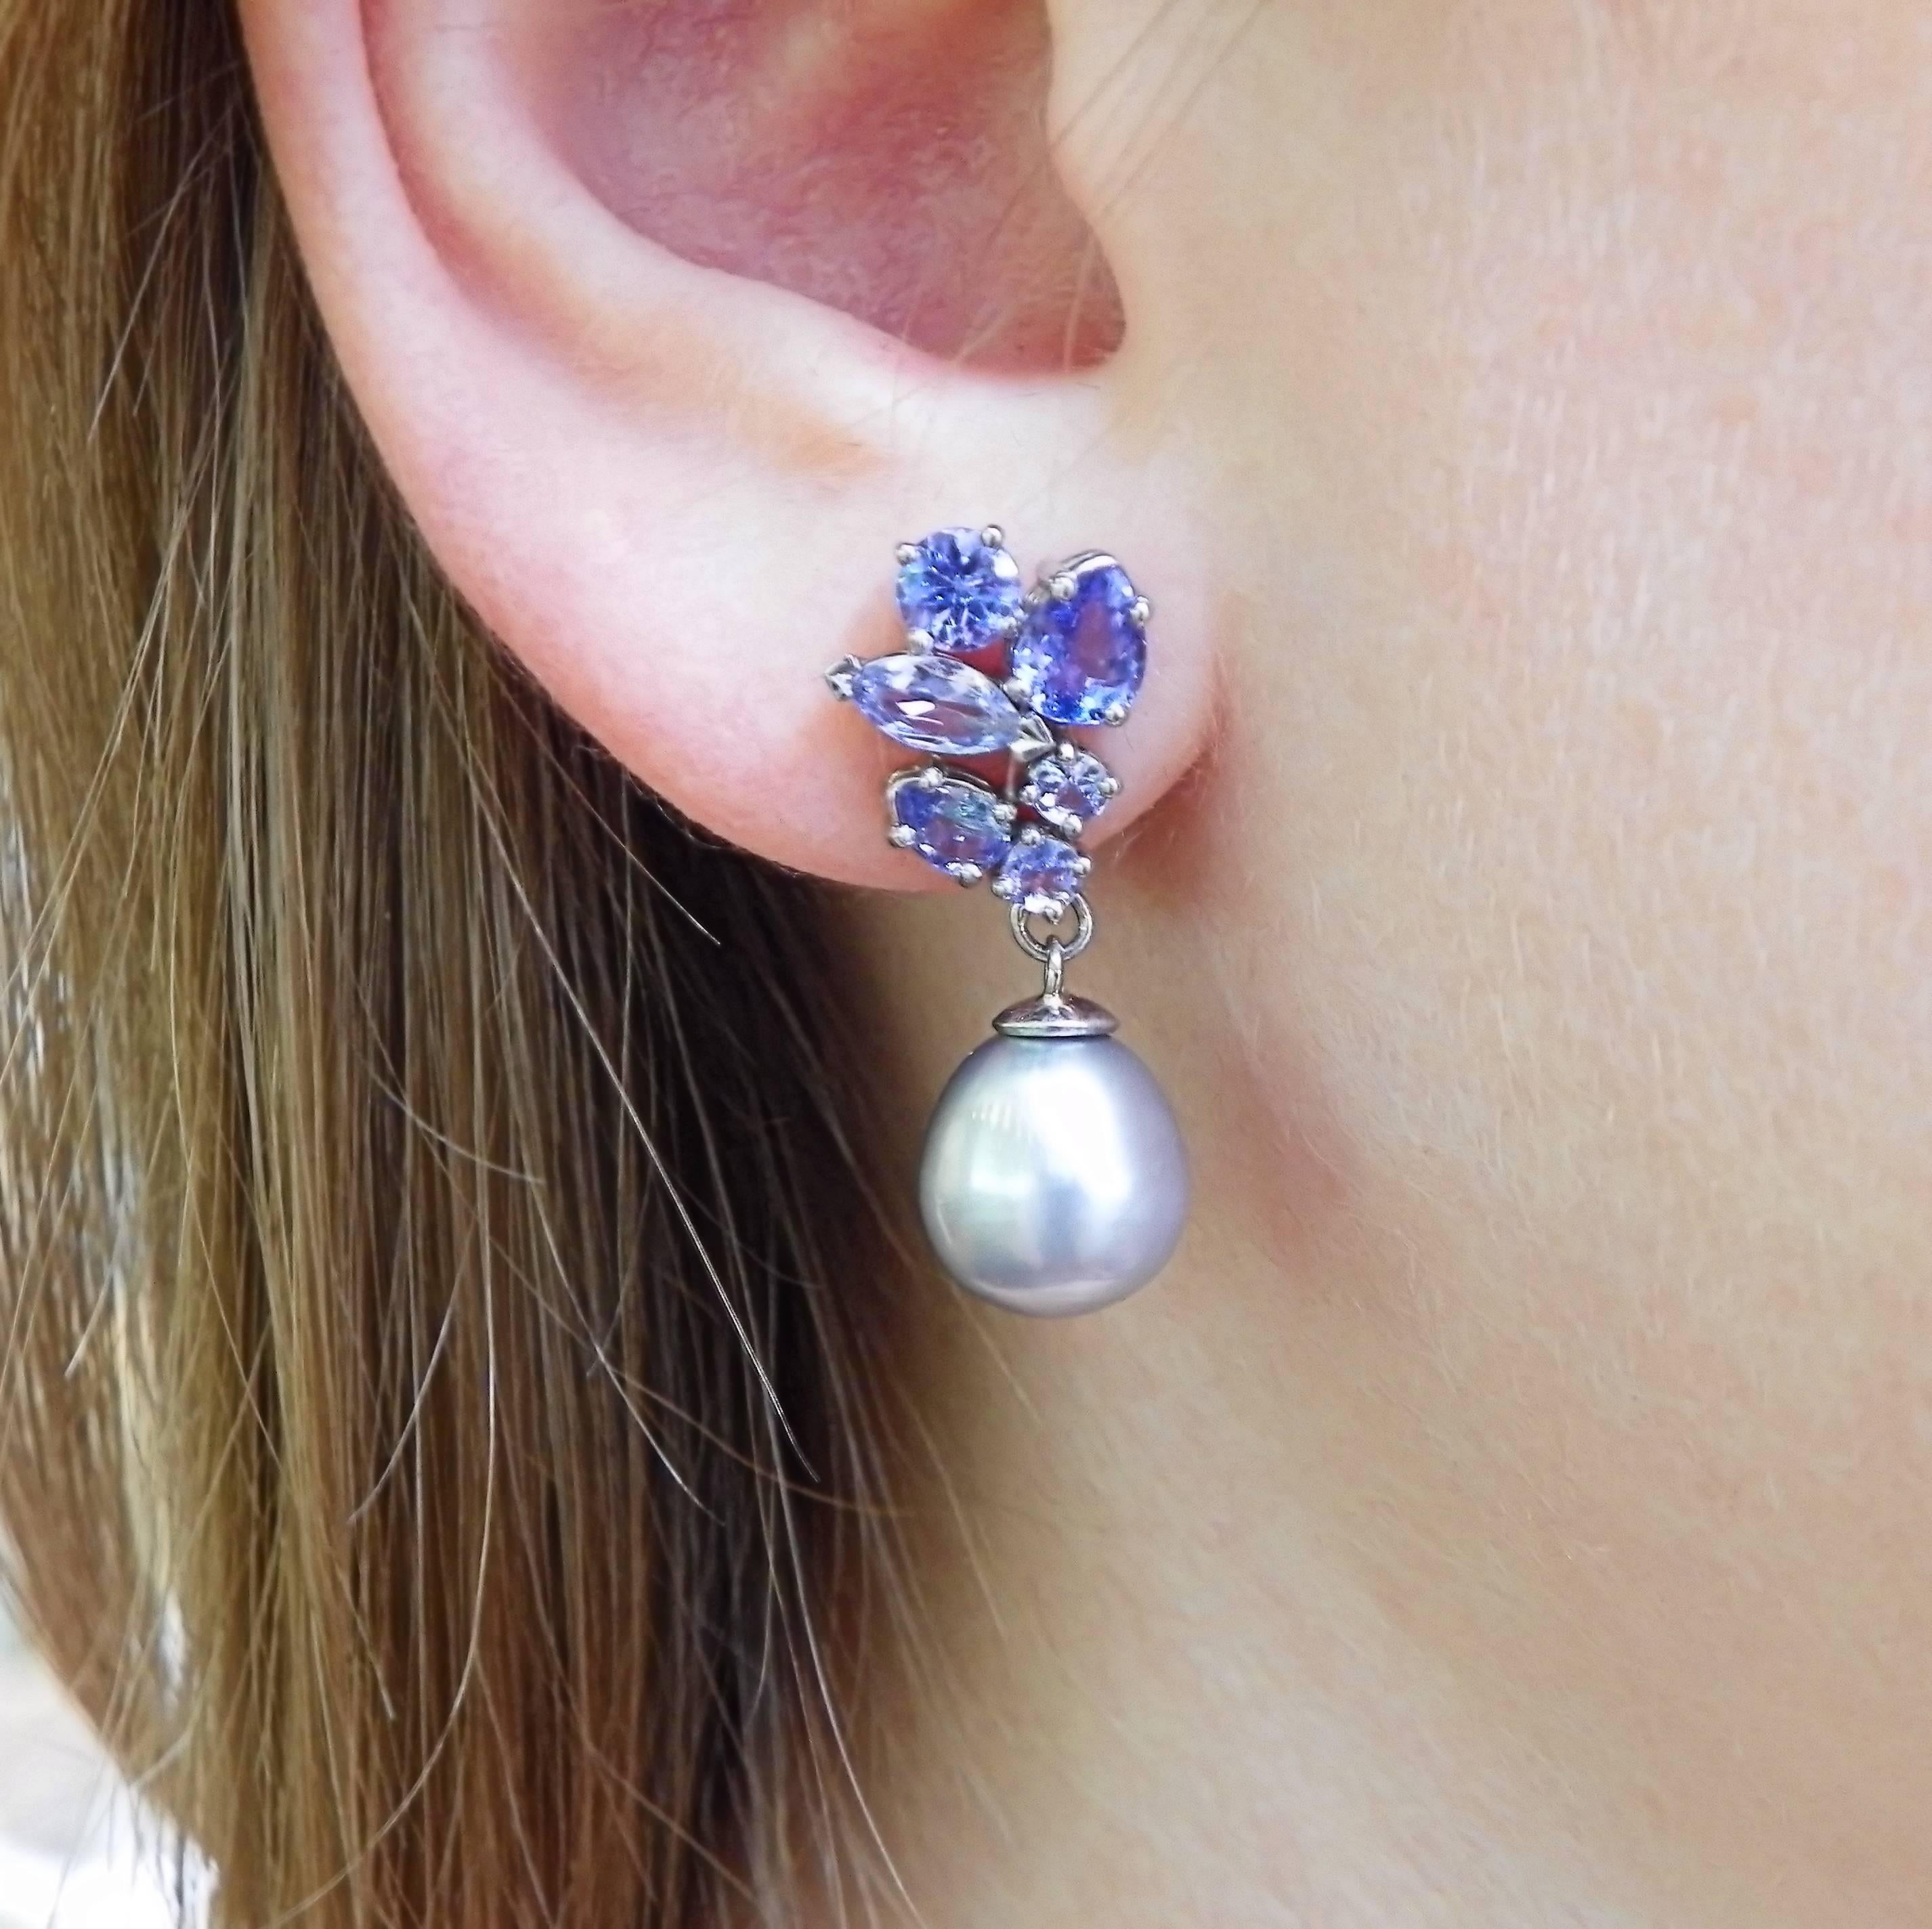 Gorgeous and unique dangling cluster drop earrings with silver pearshaped freshwater pearls and tanzanites. These lovely new earrings feature each a classic yet modern cluster with 6 tanzanites. The 14K white golden pearl drop earrings sparkle and